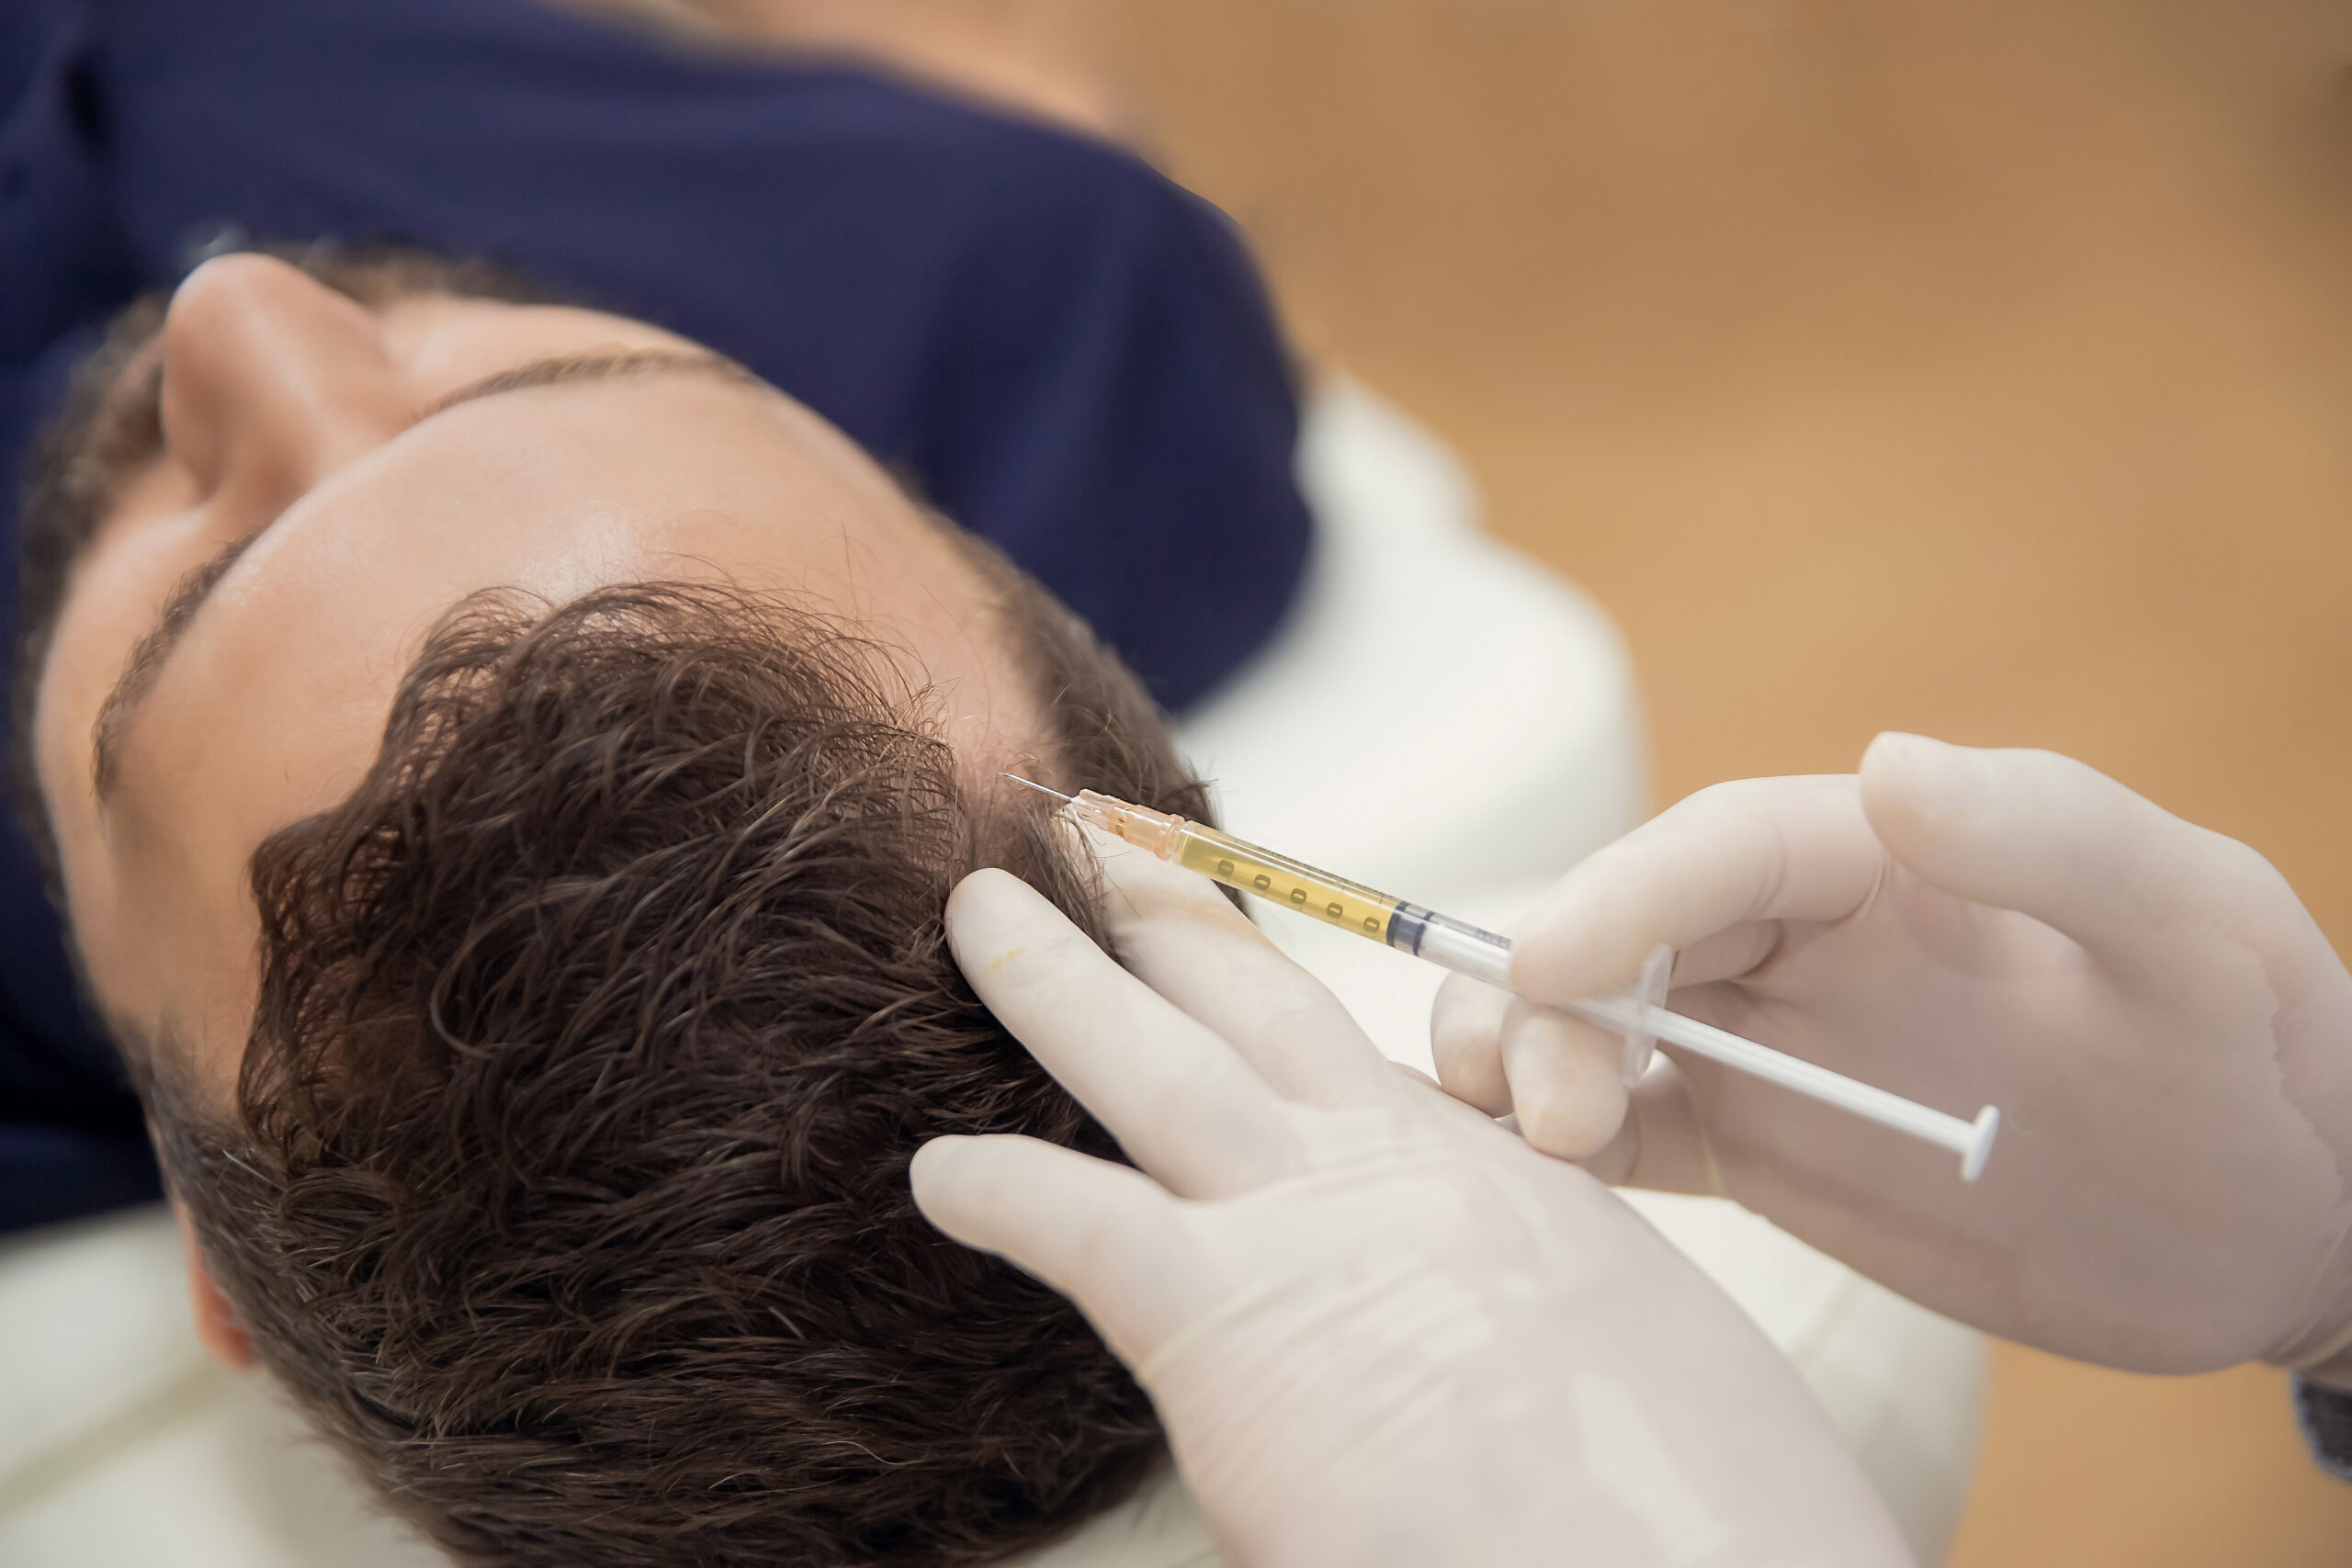 Hair mesotherapy or scalp prp: Platelet-rich plasma procedure. Beautician doctor makes injections in the man head for hair growth against hair loss and baldness (Hair mesotherapy or scalp prp: Platelet-rich plasma procedure. Beautician doctor makes in